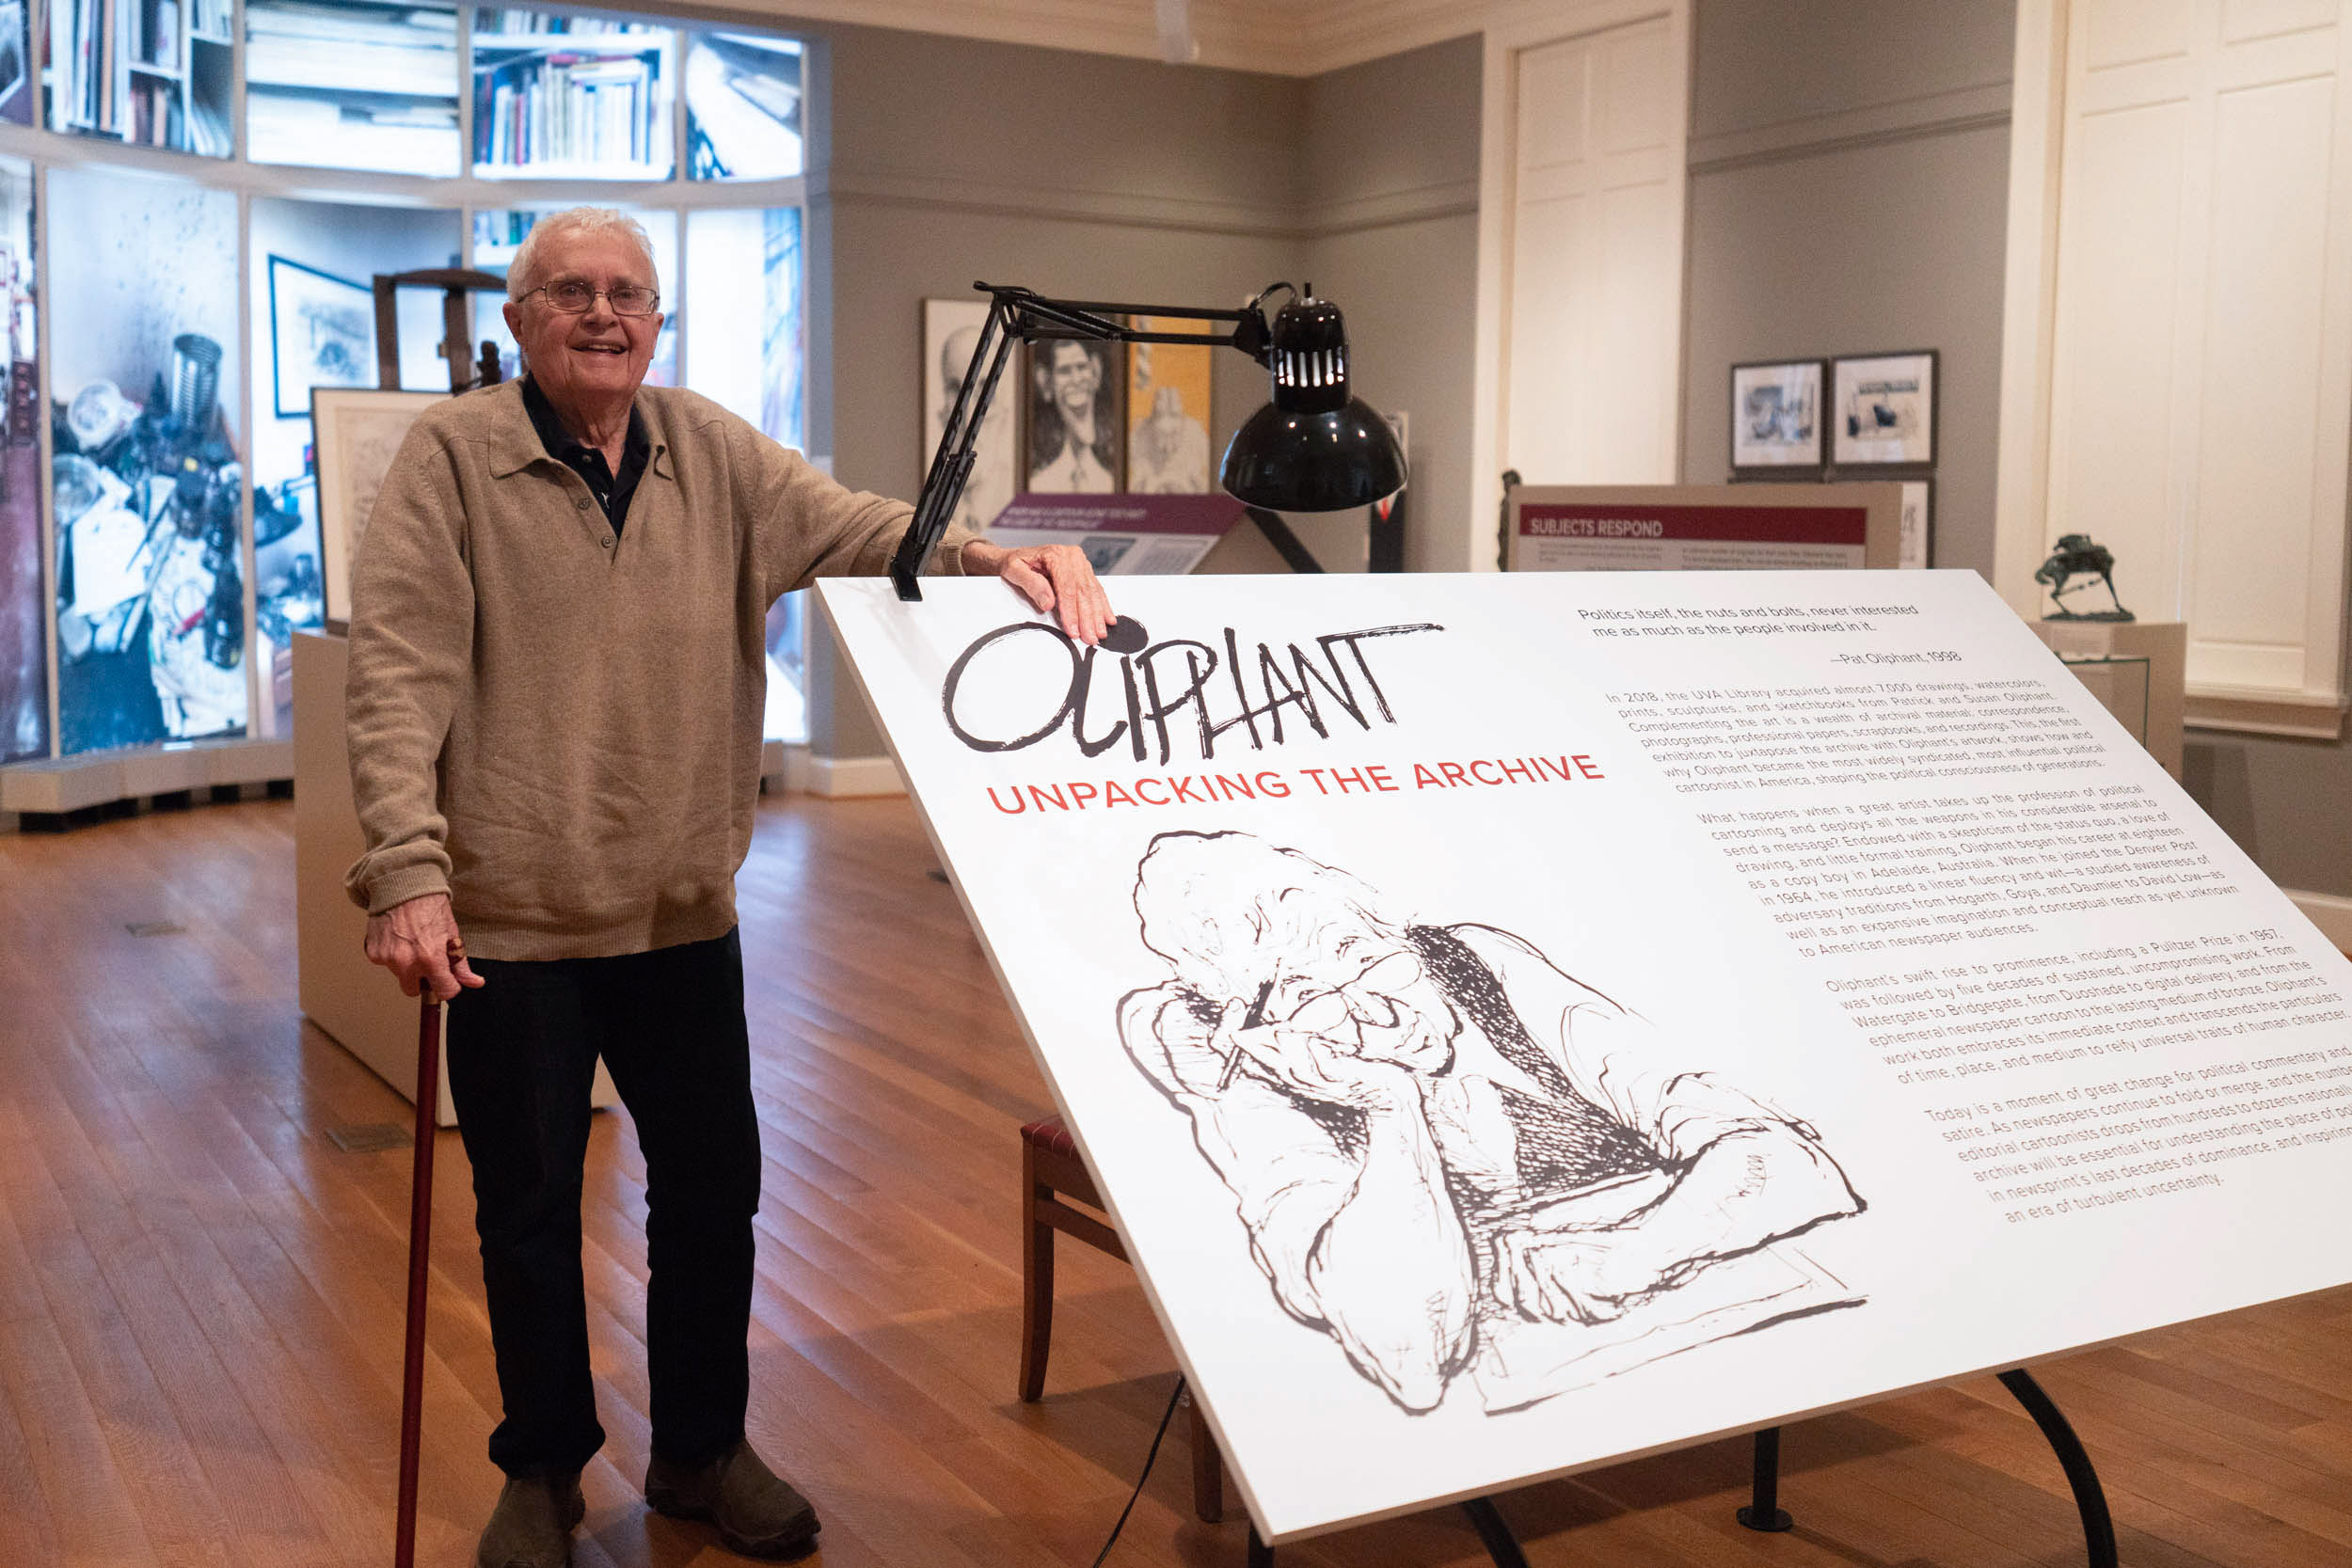 Oliphant stands in an exhibit about his cartooning of political topics